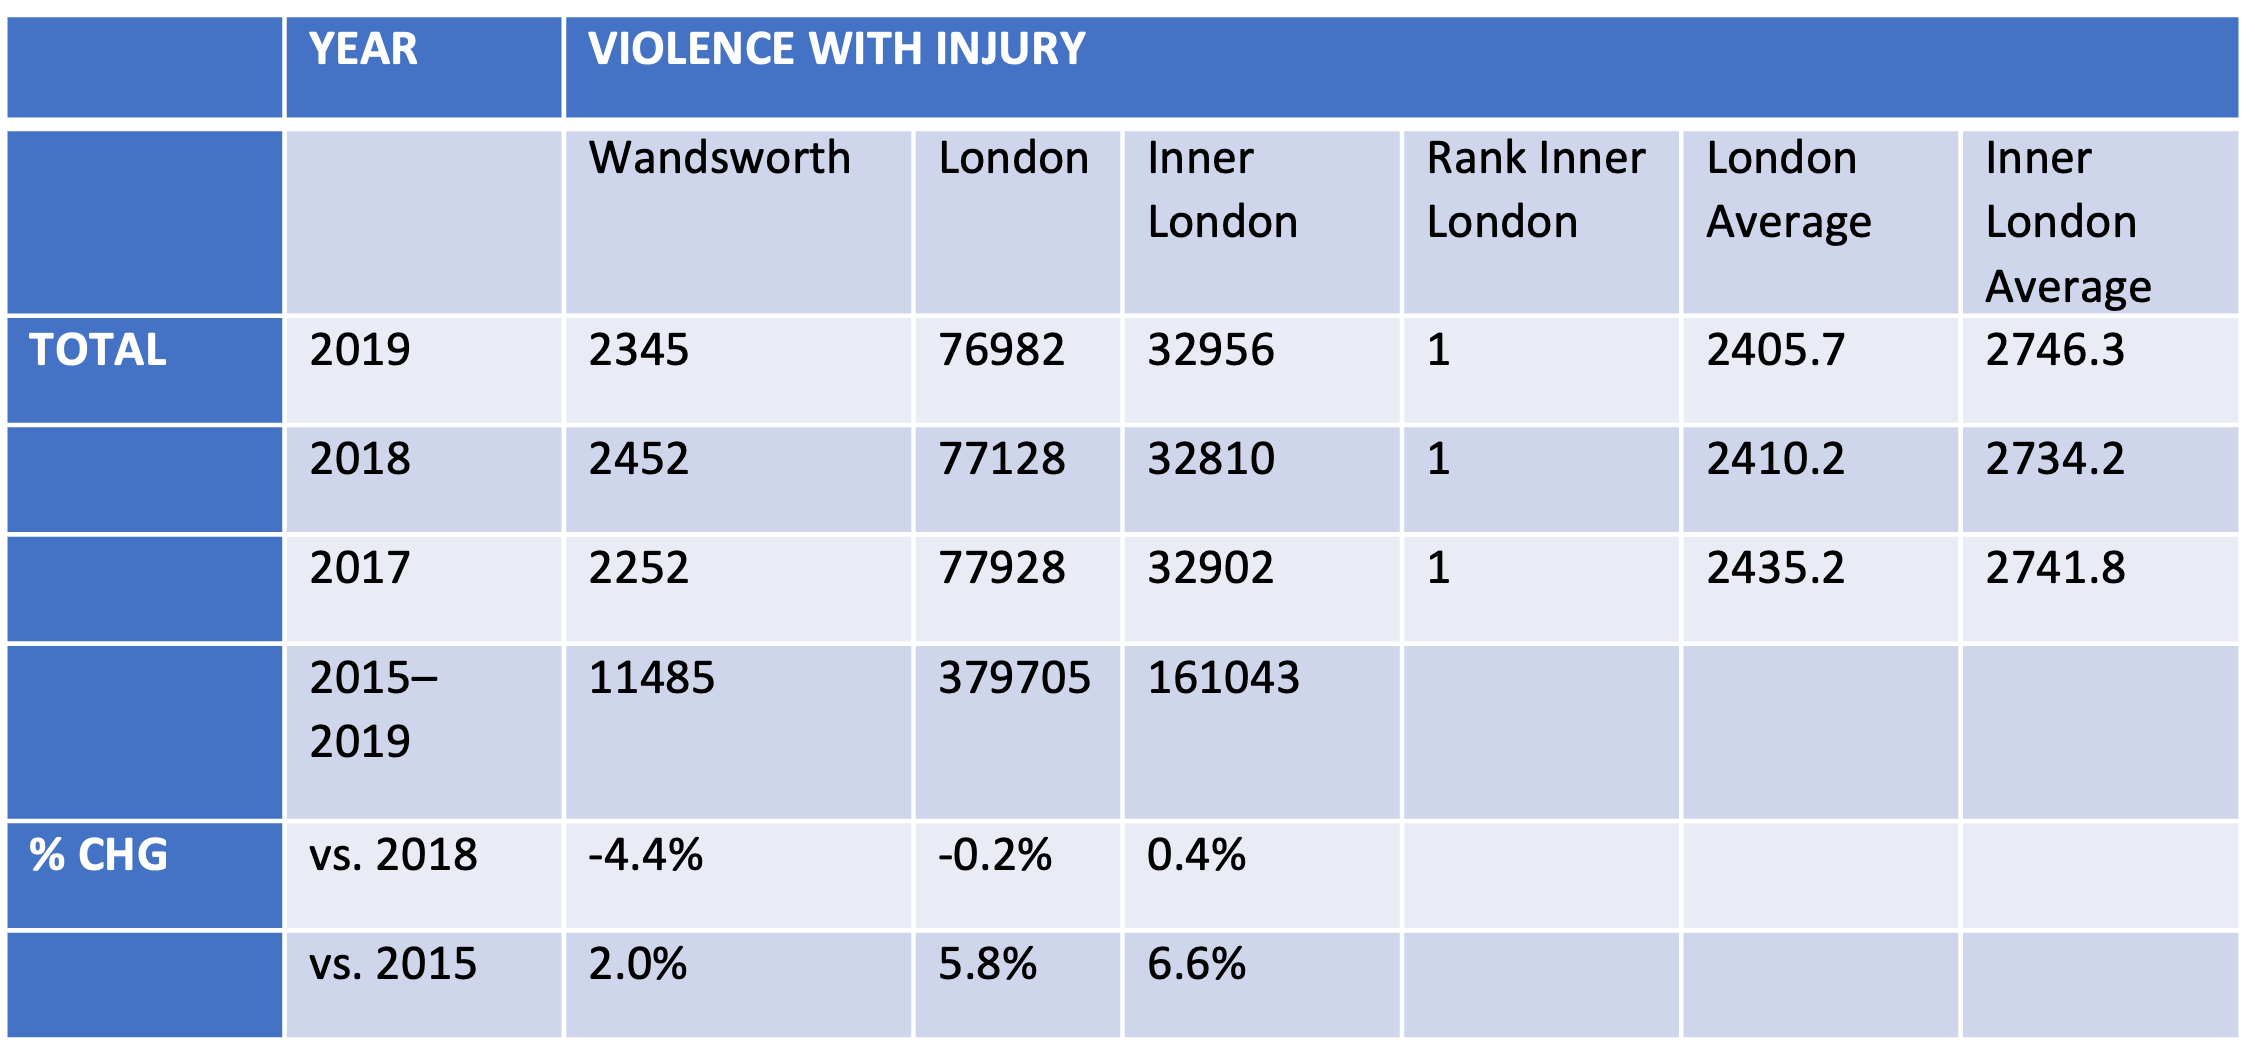 Trends in violence with Injury, and percentage change over time in Wandsworth, London and Inner London, 2015–2020